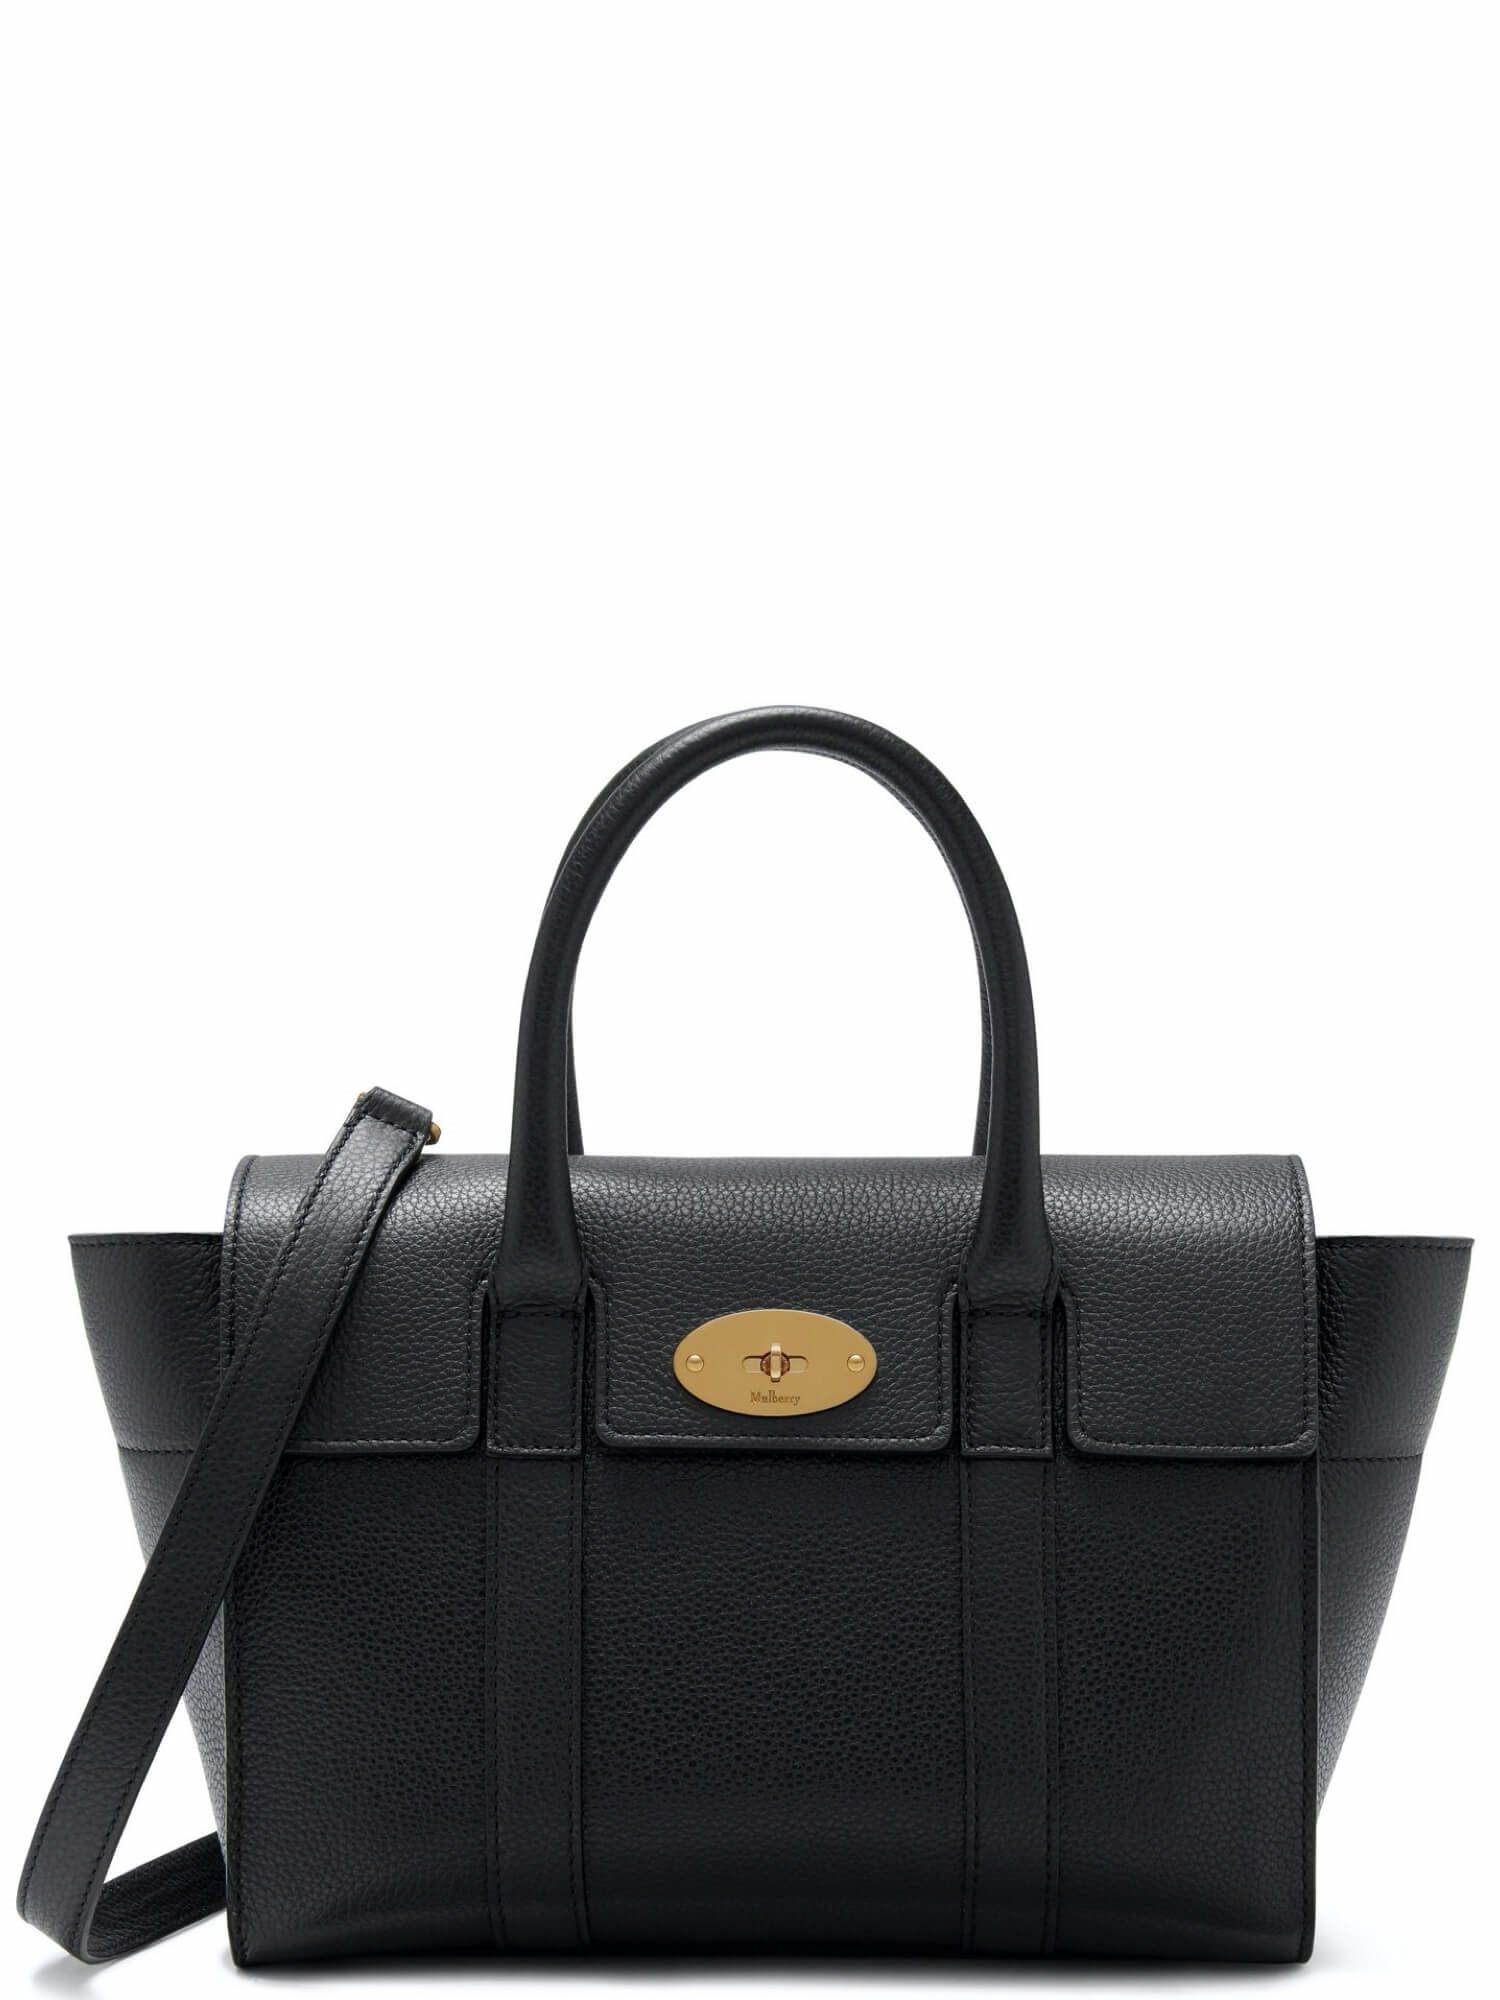 audition Sidst Bølle Mulberry Bayswater Small [Sort] Black Classic Grain Leather Tote